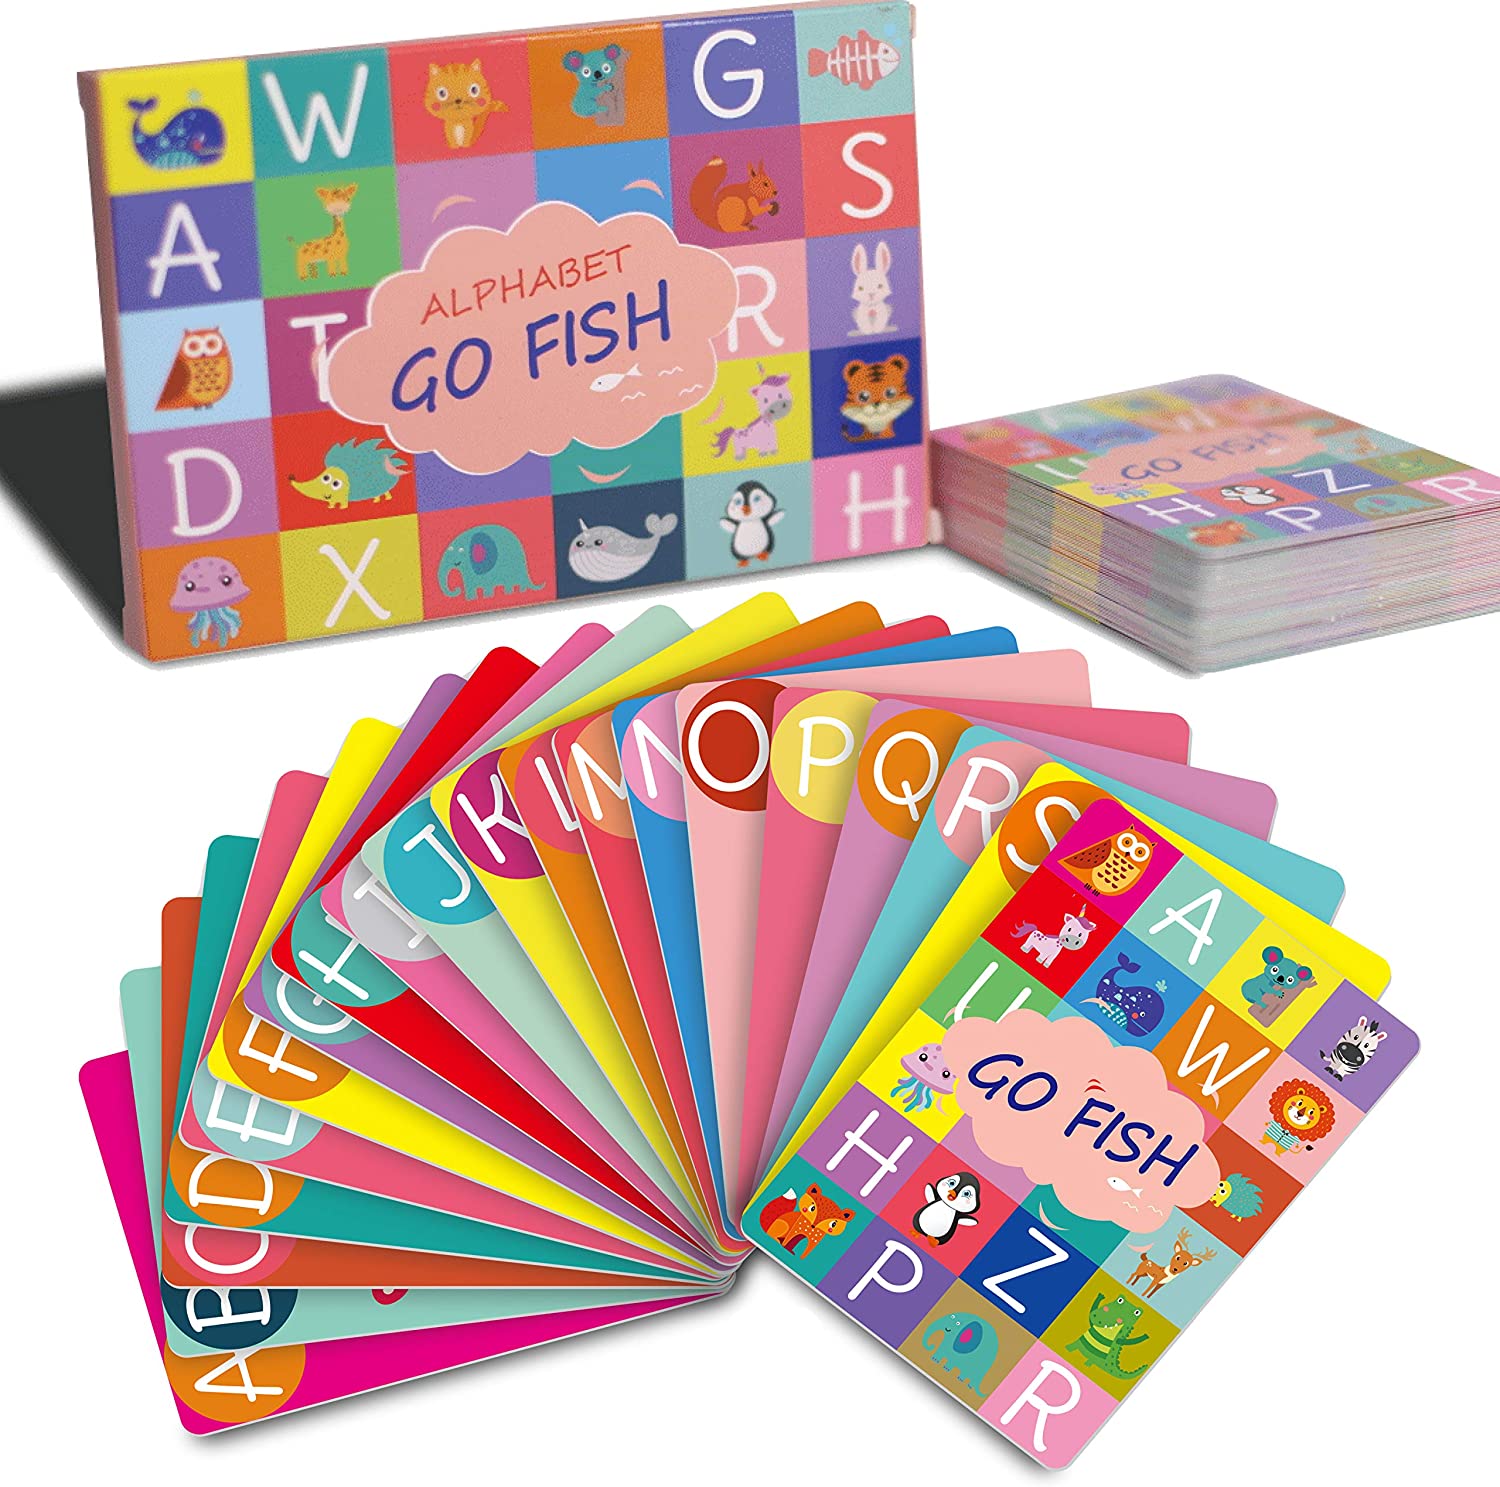 upgraded-alphabet-go-fish-classic-card-game-for-only-3-49-was-6-99